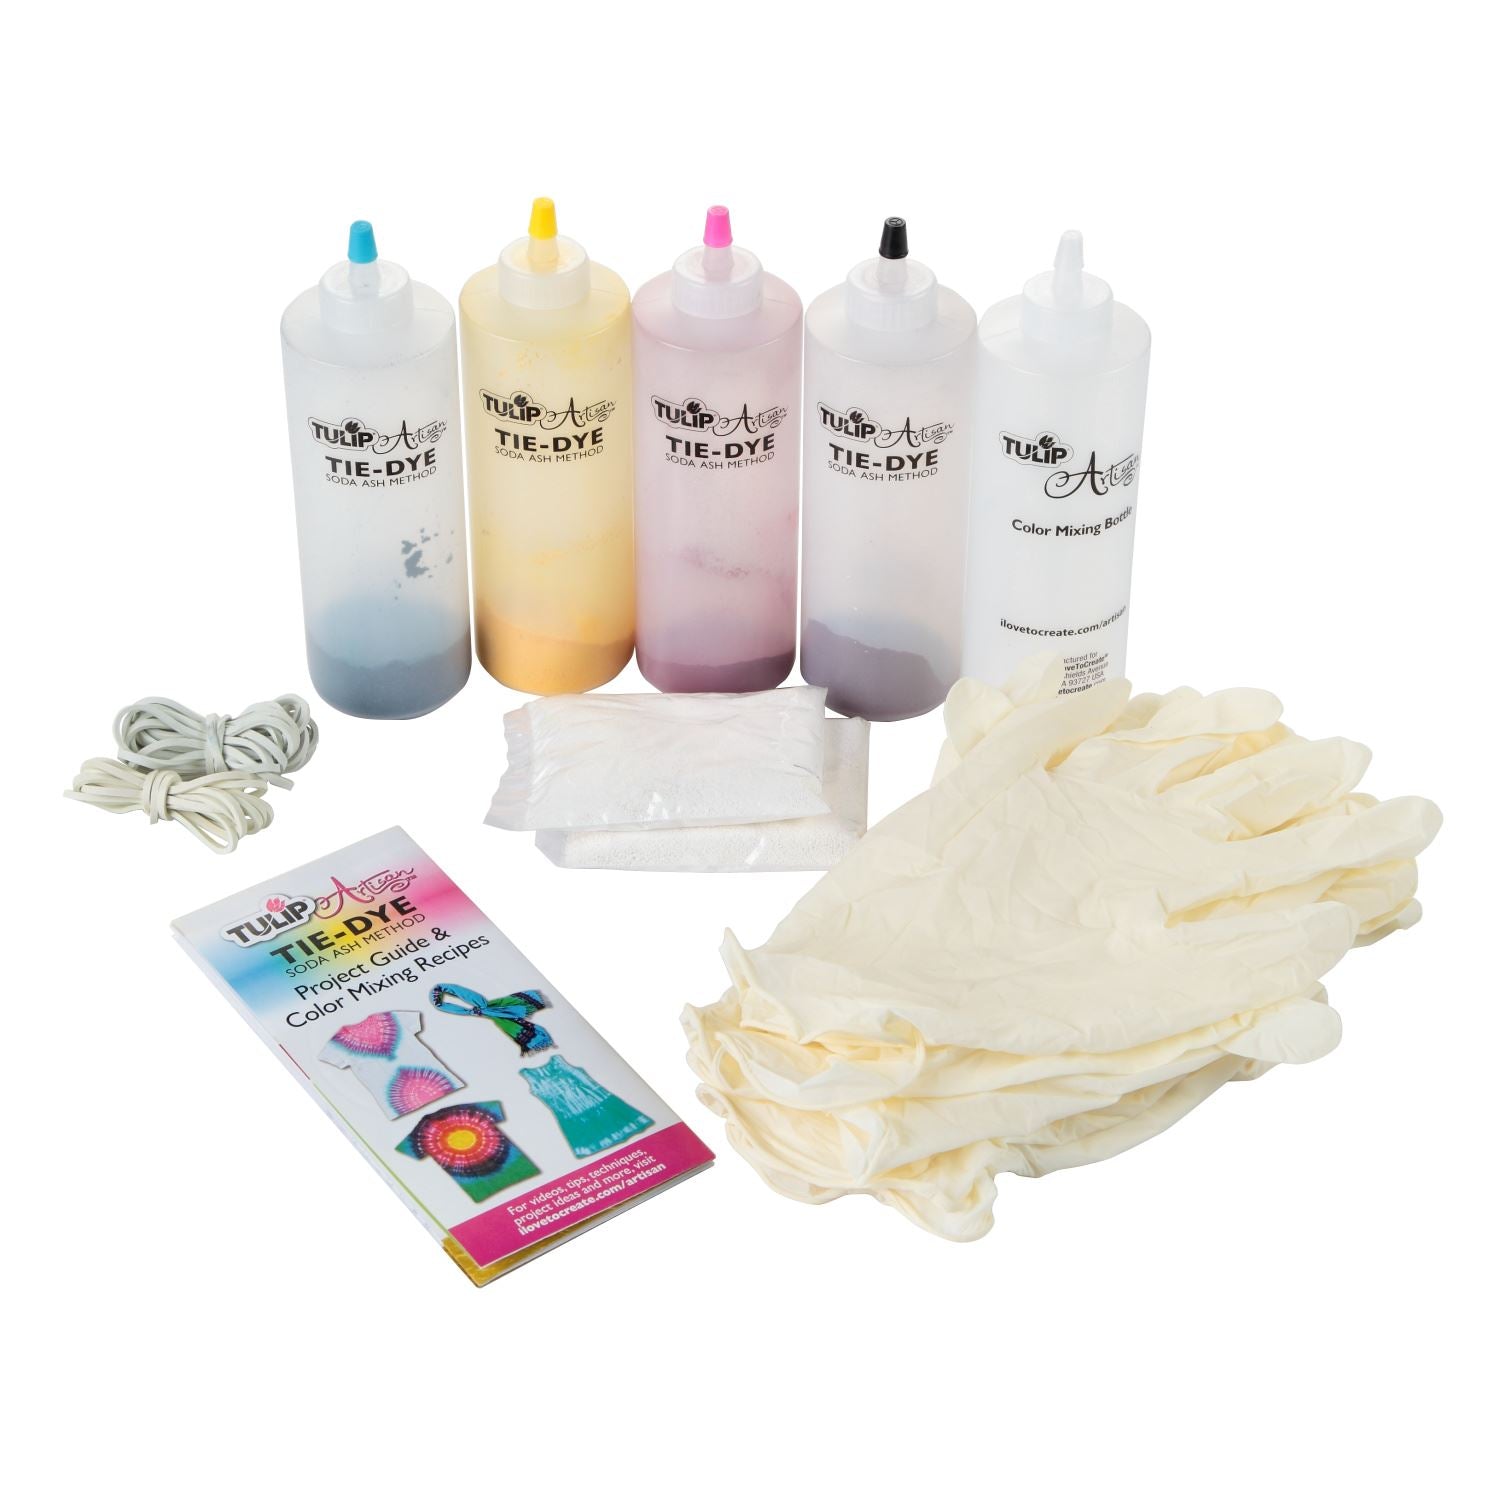 The Complete Guide to Soda Ash Tie Dye: Best Practices & Tips